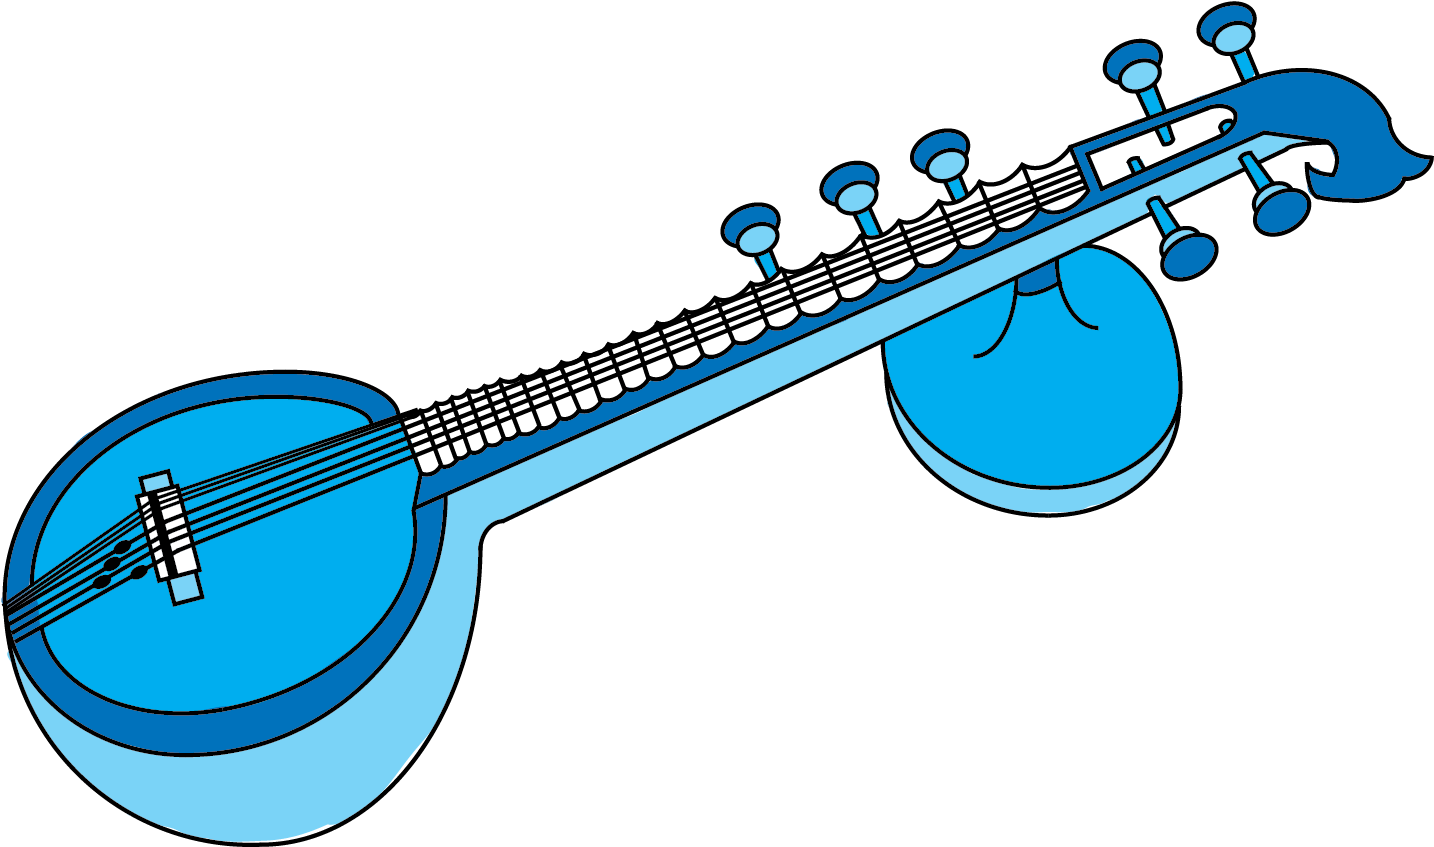 A Blue Drawing Of A Musical Instrument